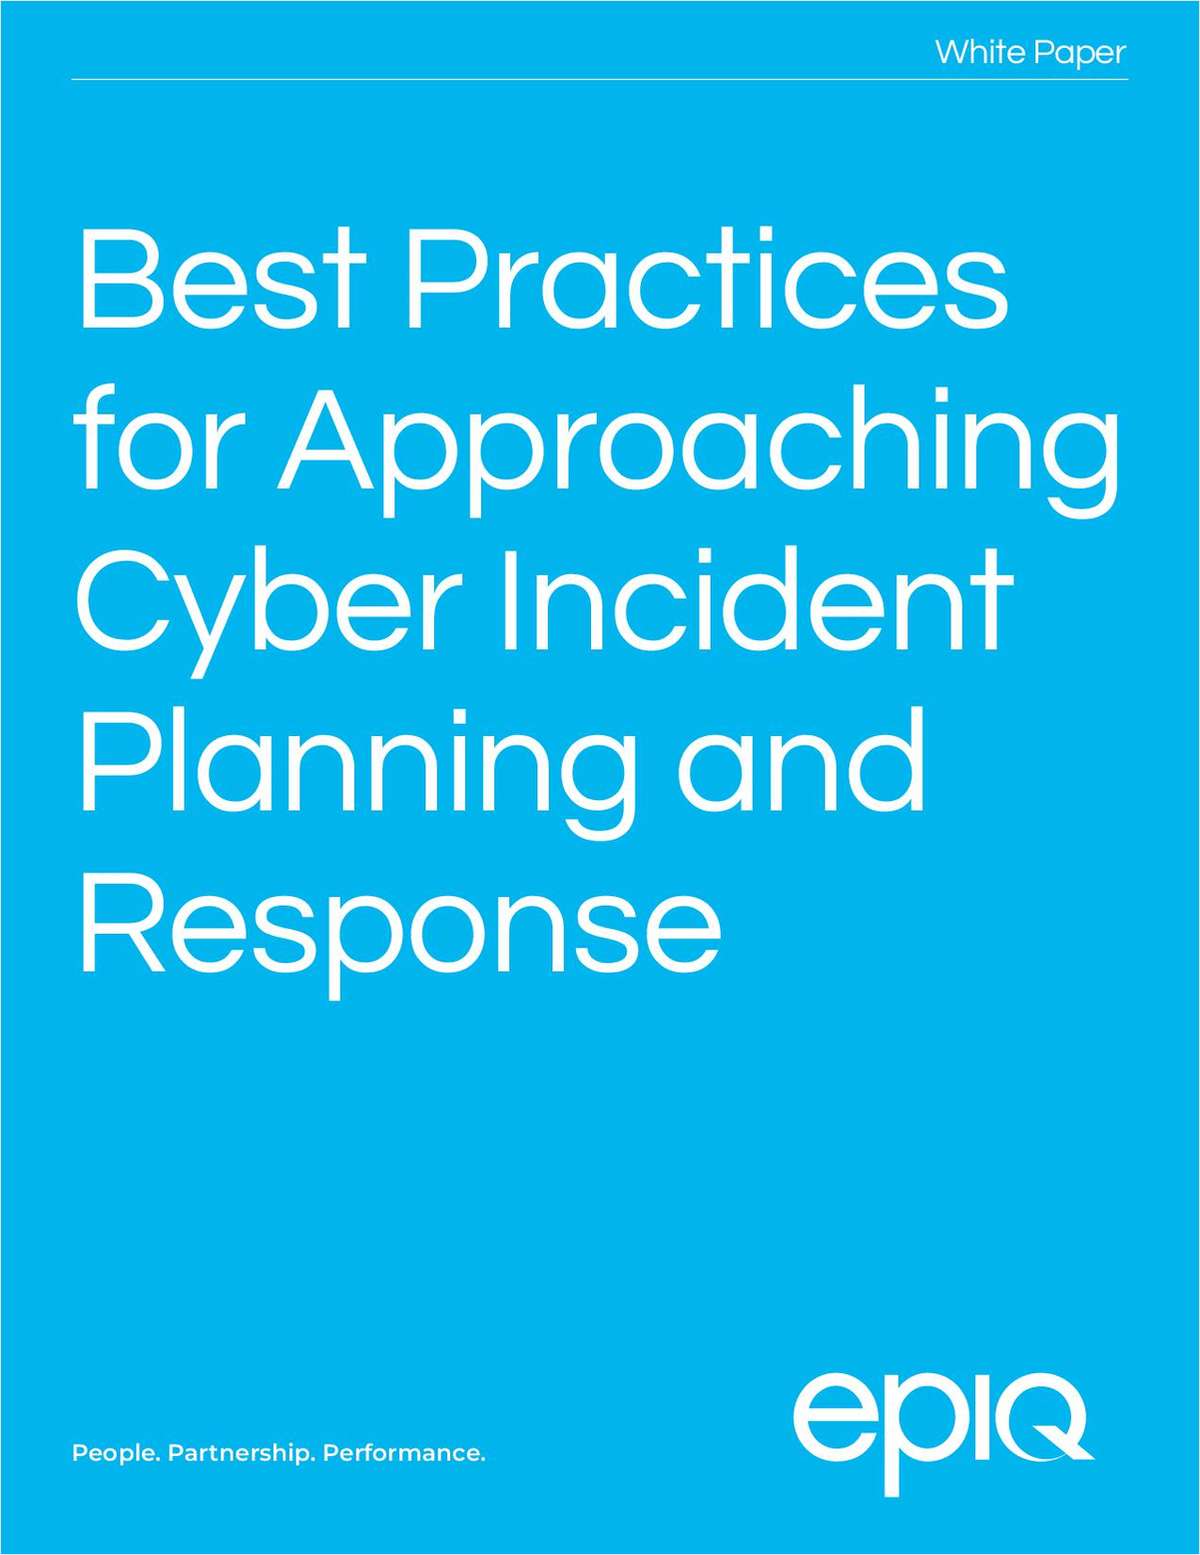 Best Practices for Approaching Cyber Incident Planning and Response